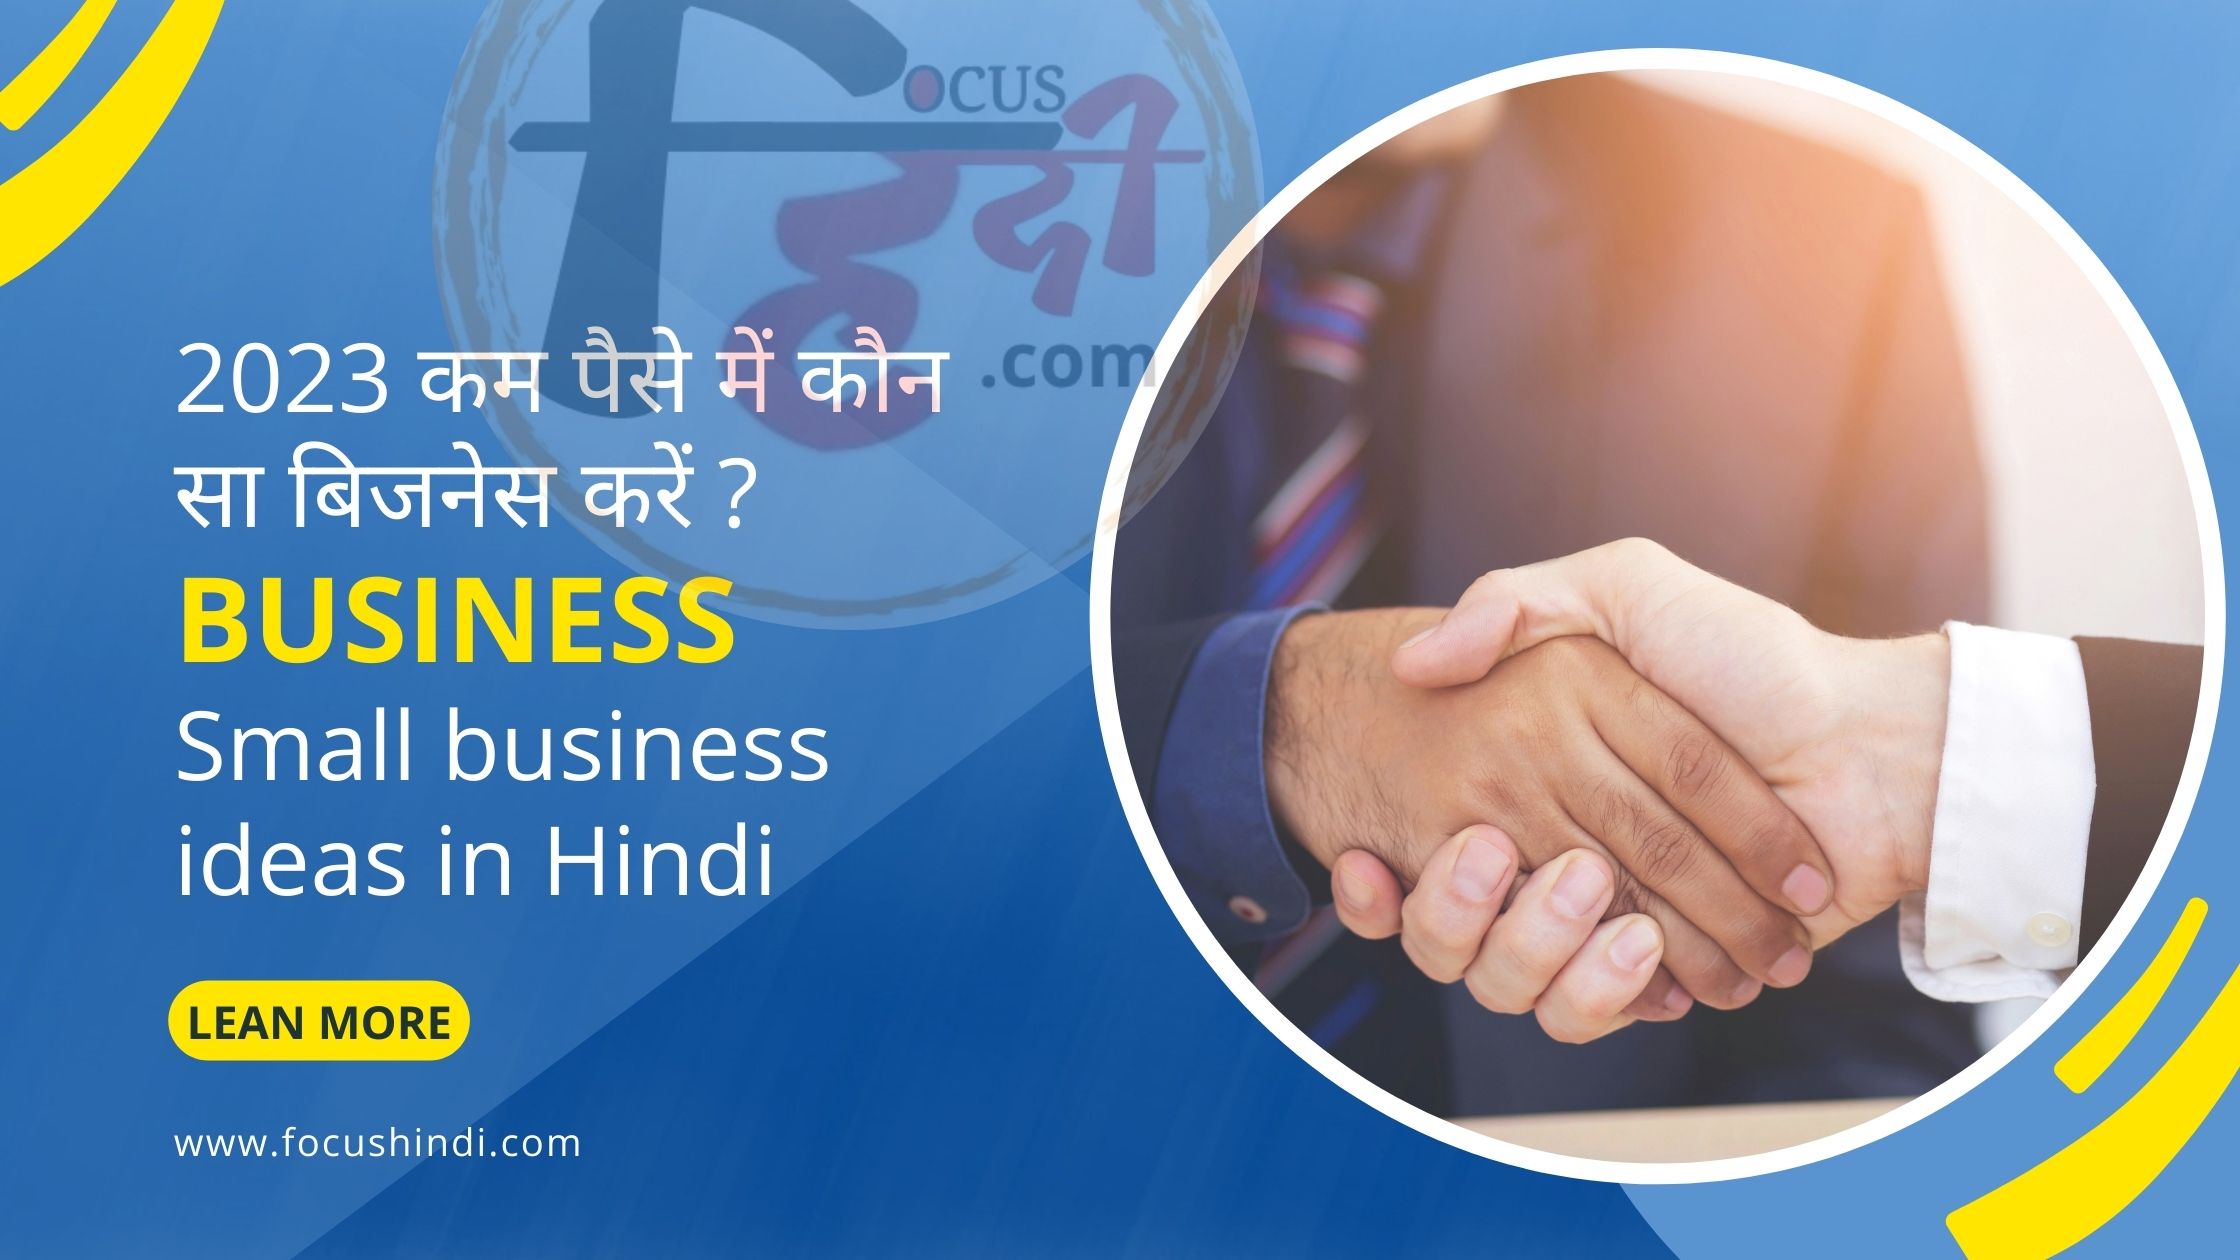 Chote business ideas in Hindi